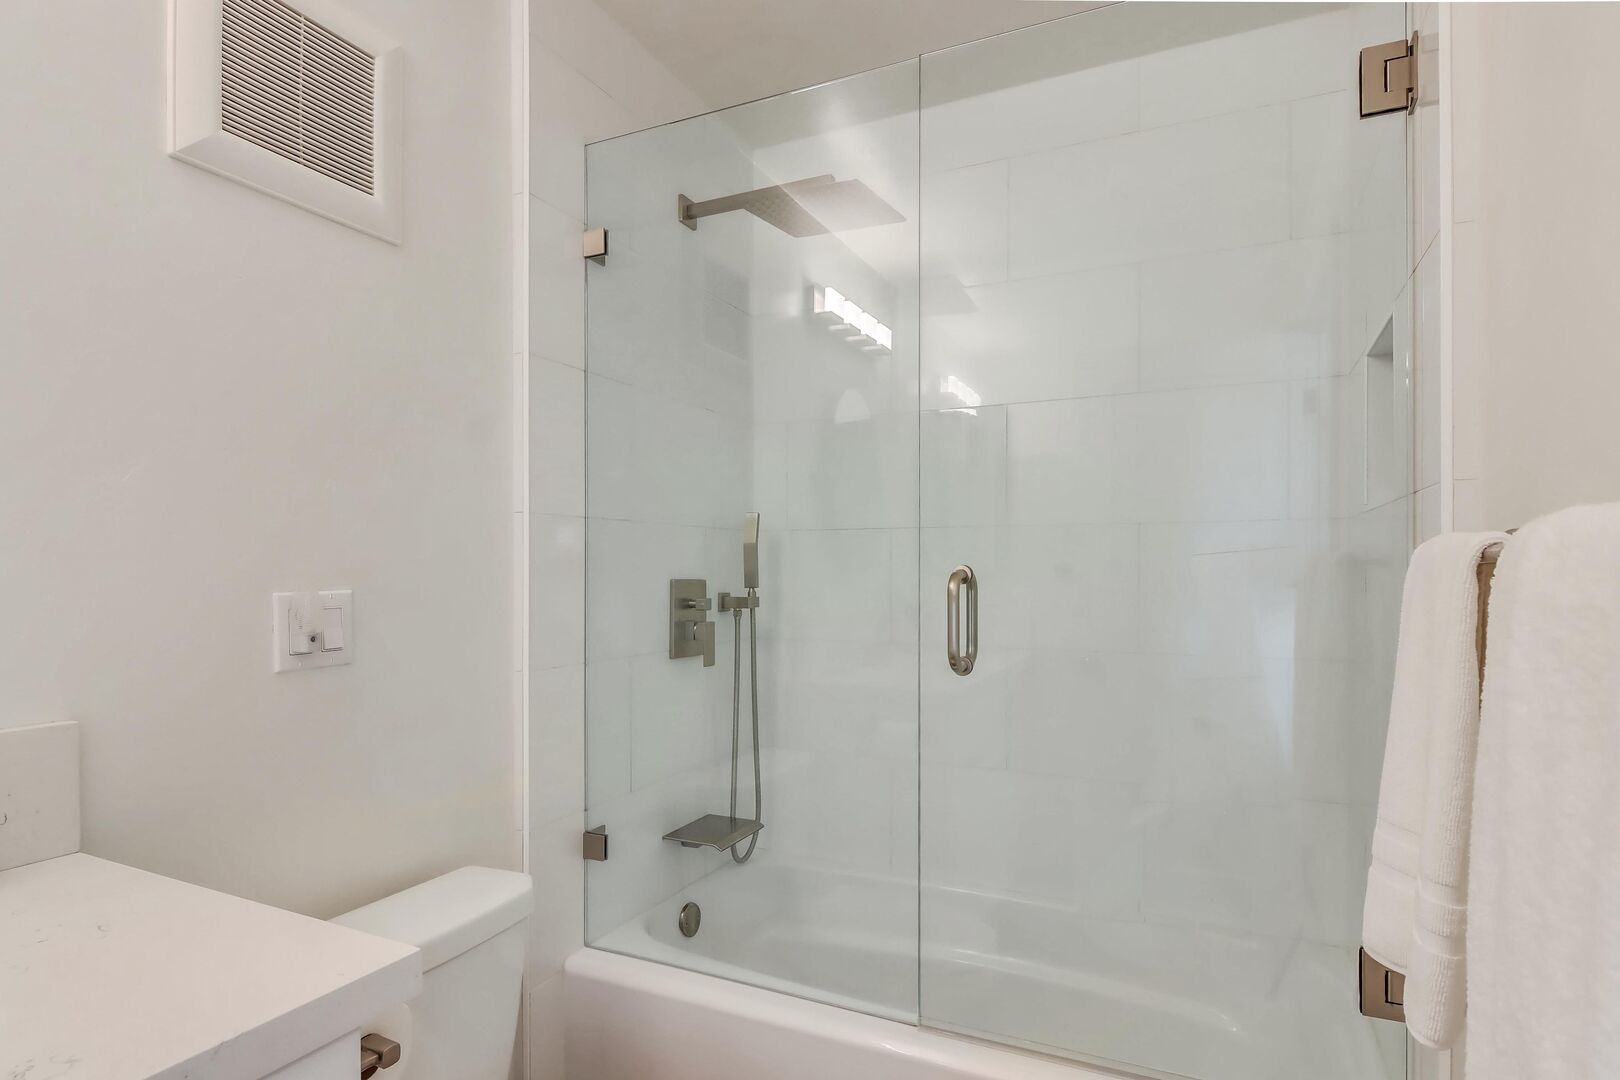 Guest bathroom shower/tub combo with rainfall shower head and and separate hand-held hose